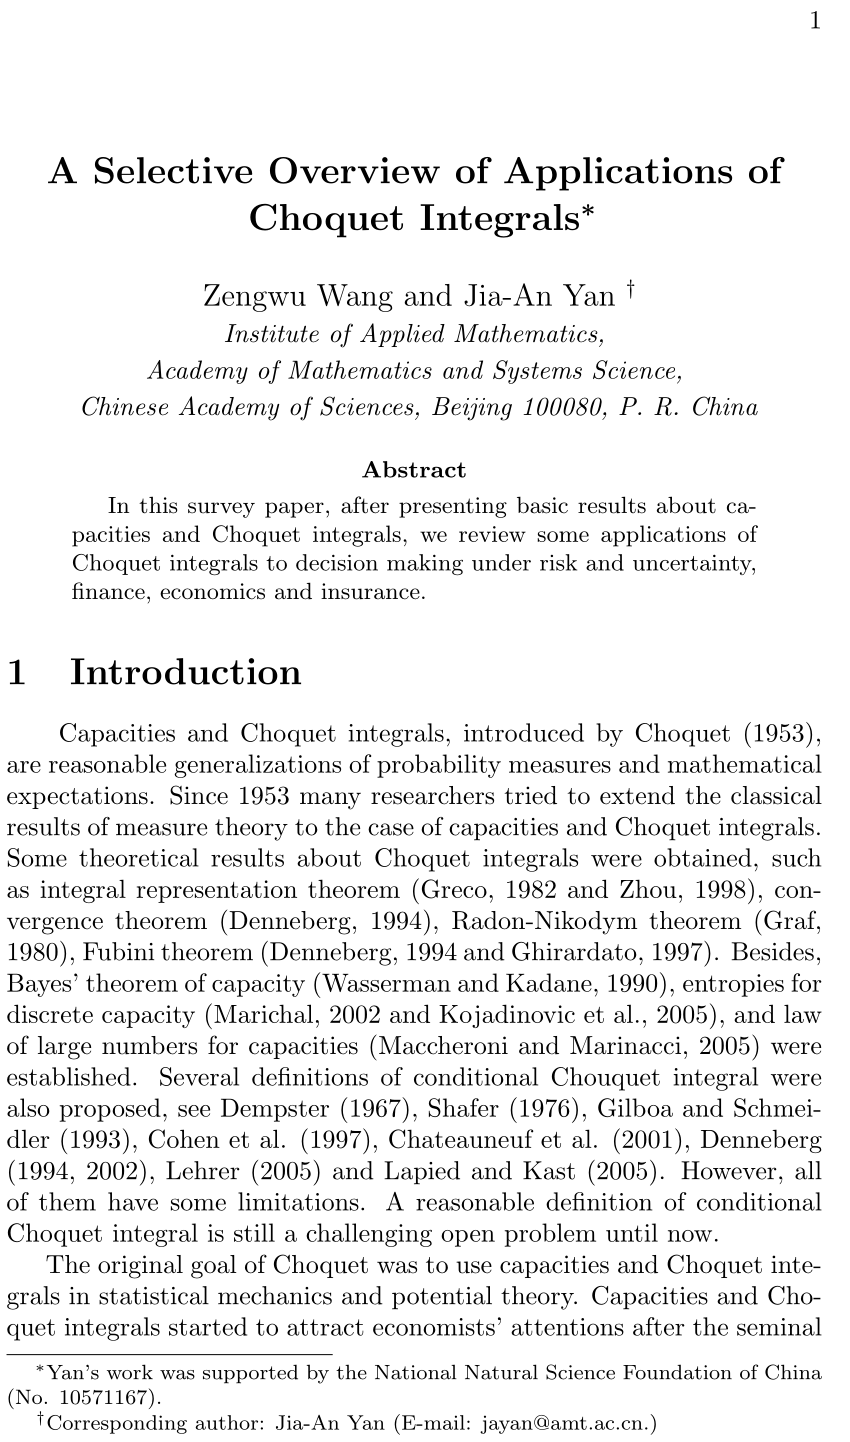 Pdf A Selective Overview Of Applications Of Choquet Integrals